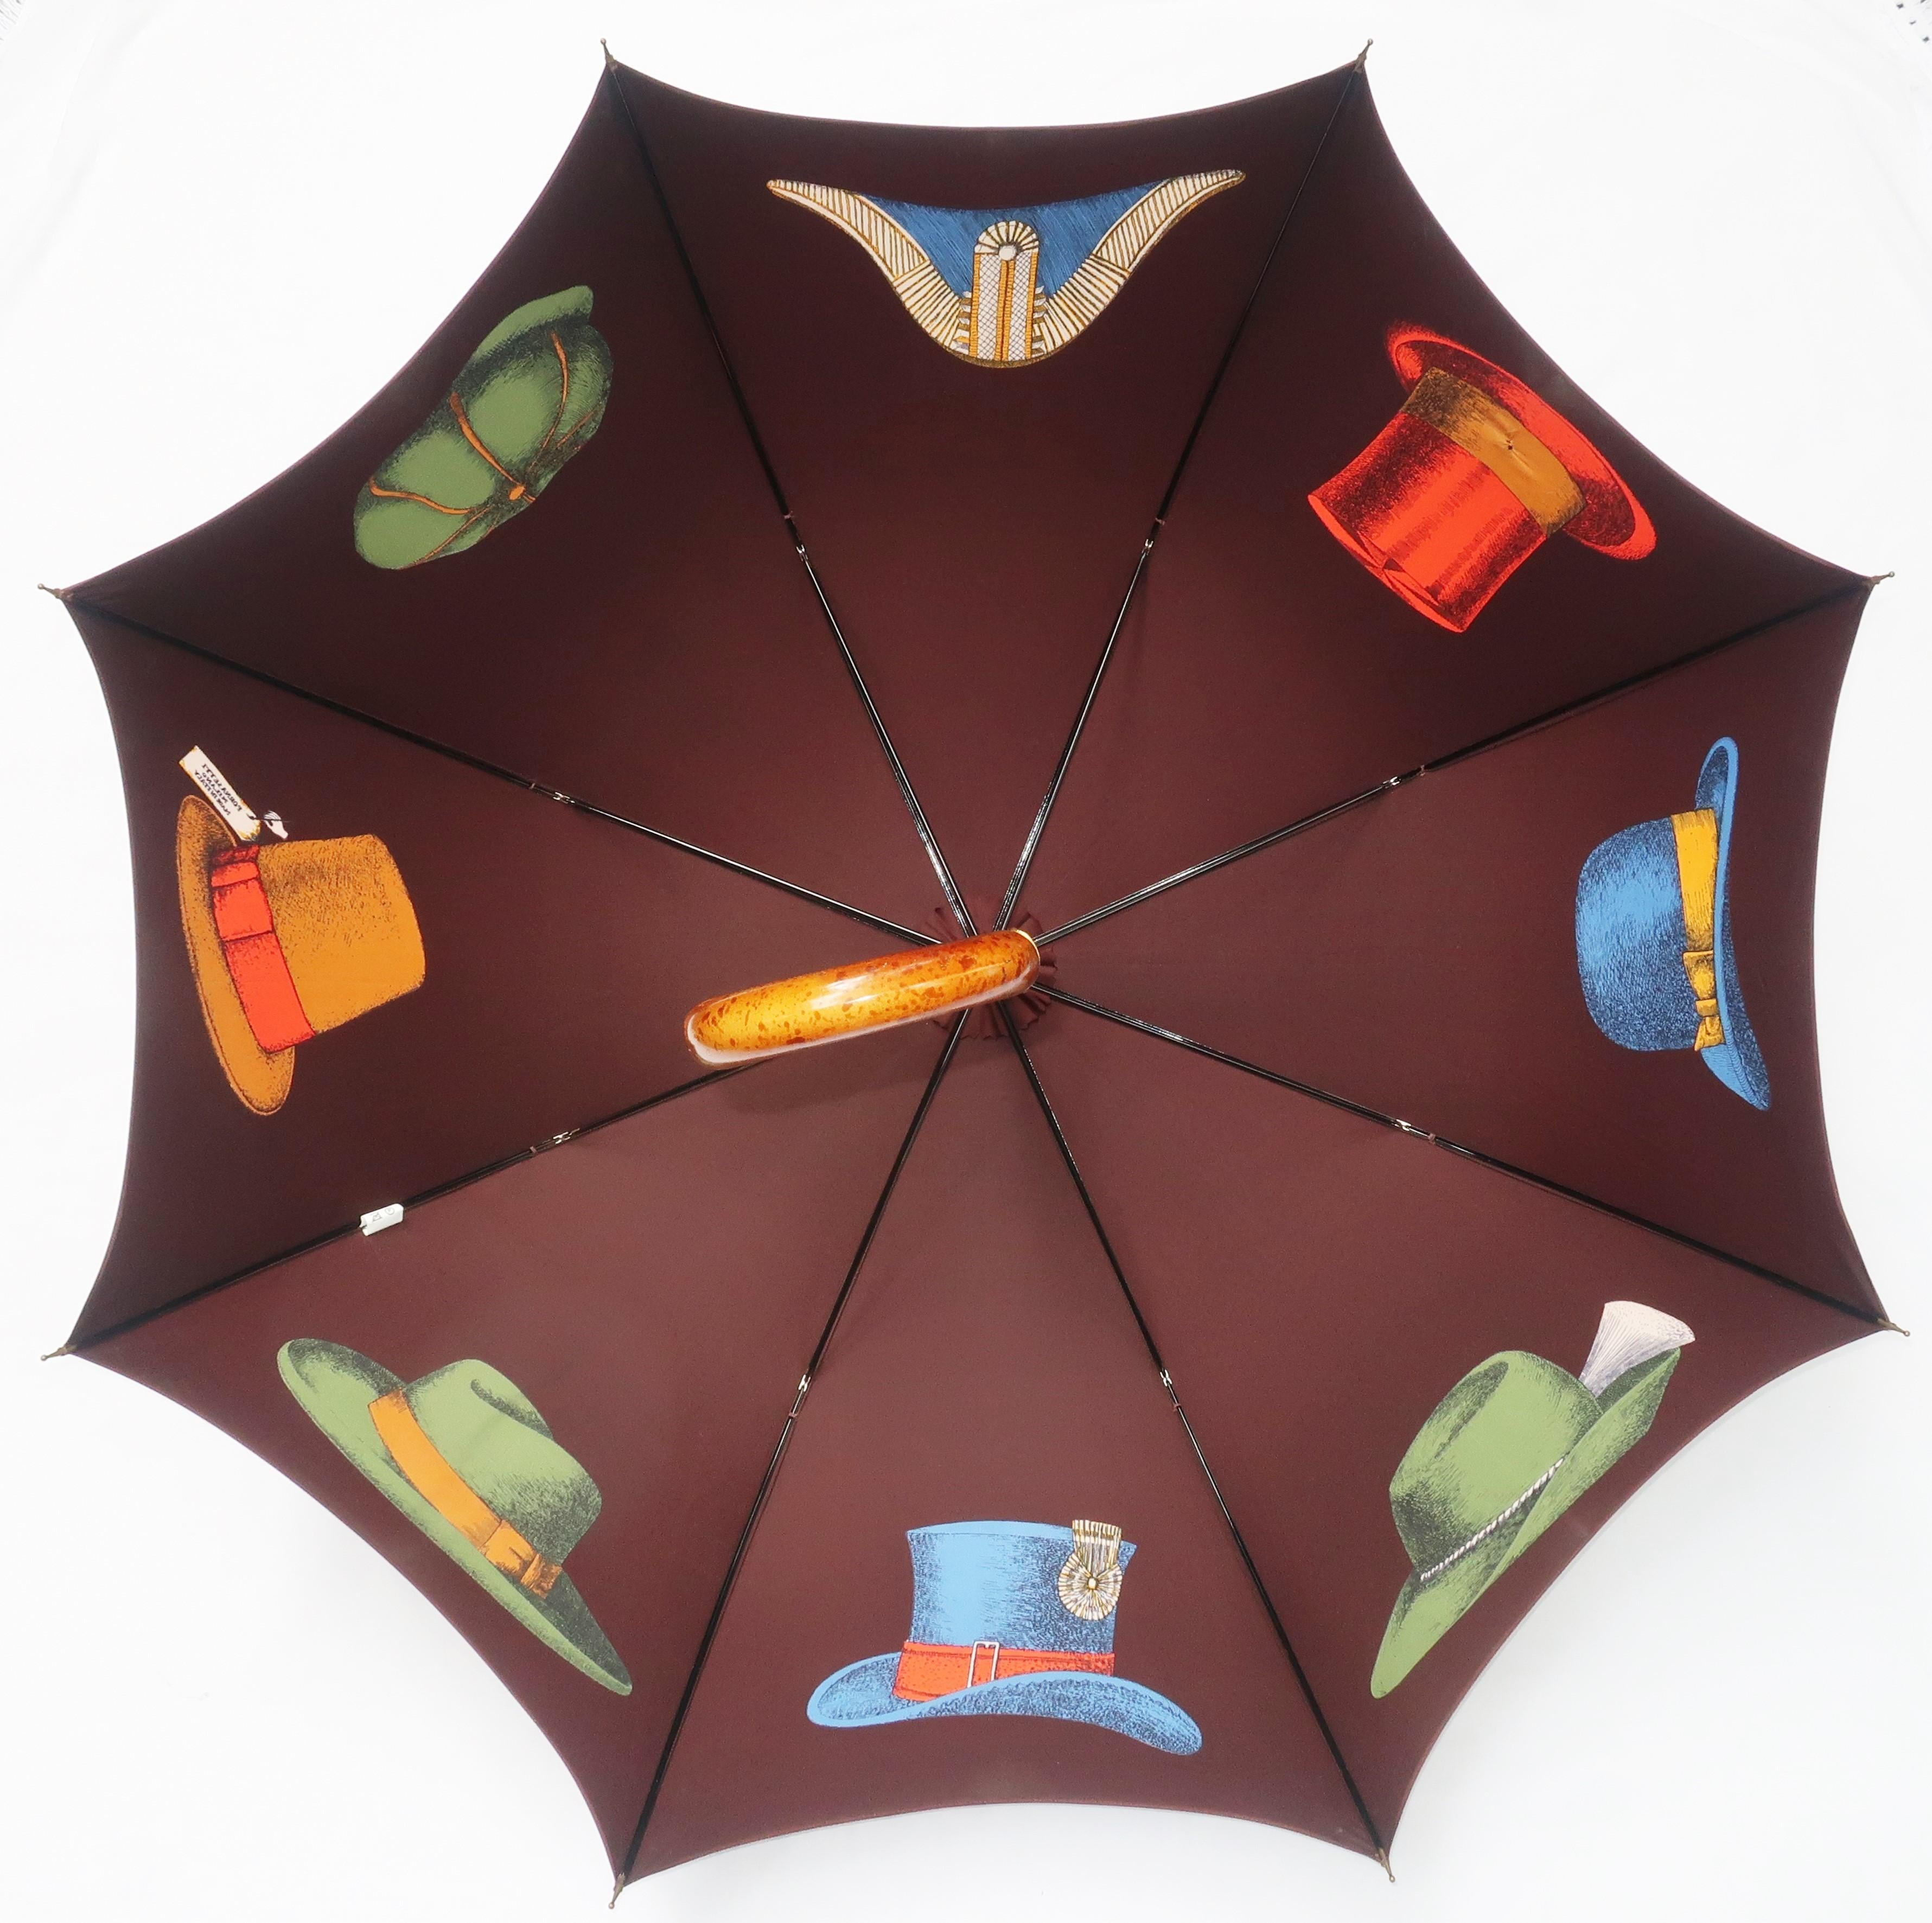 From the creative mind of Piero Fornasetti ... a dapper and dashing brown umbrella decorated with trompe l'oeil images of hats in shades of orange, red, green, blue and  golden yellow.  Beautifully made with wood shaft, burled handle, brass umbrella